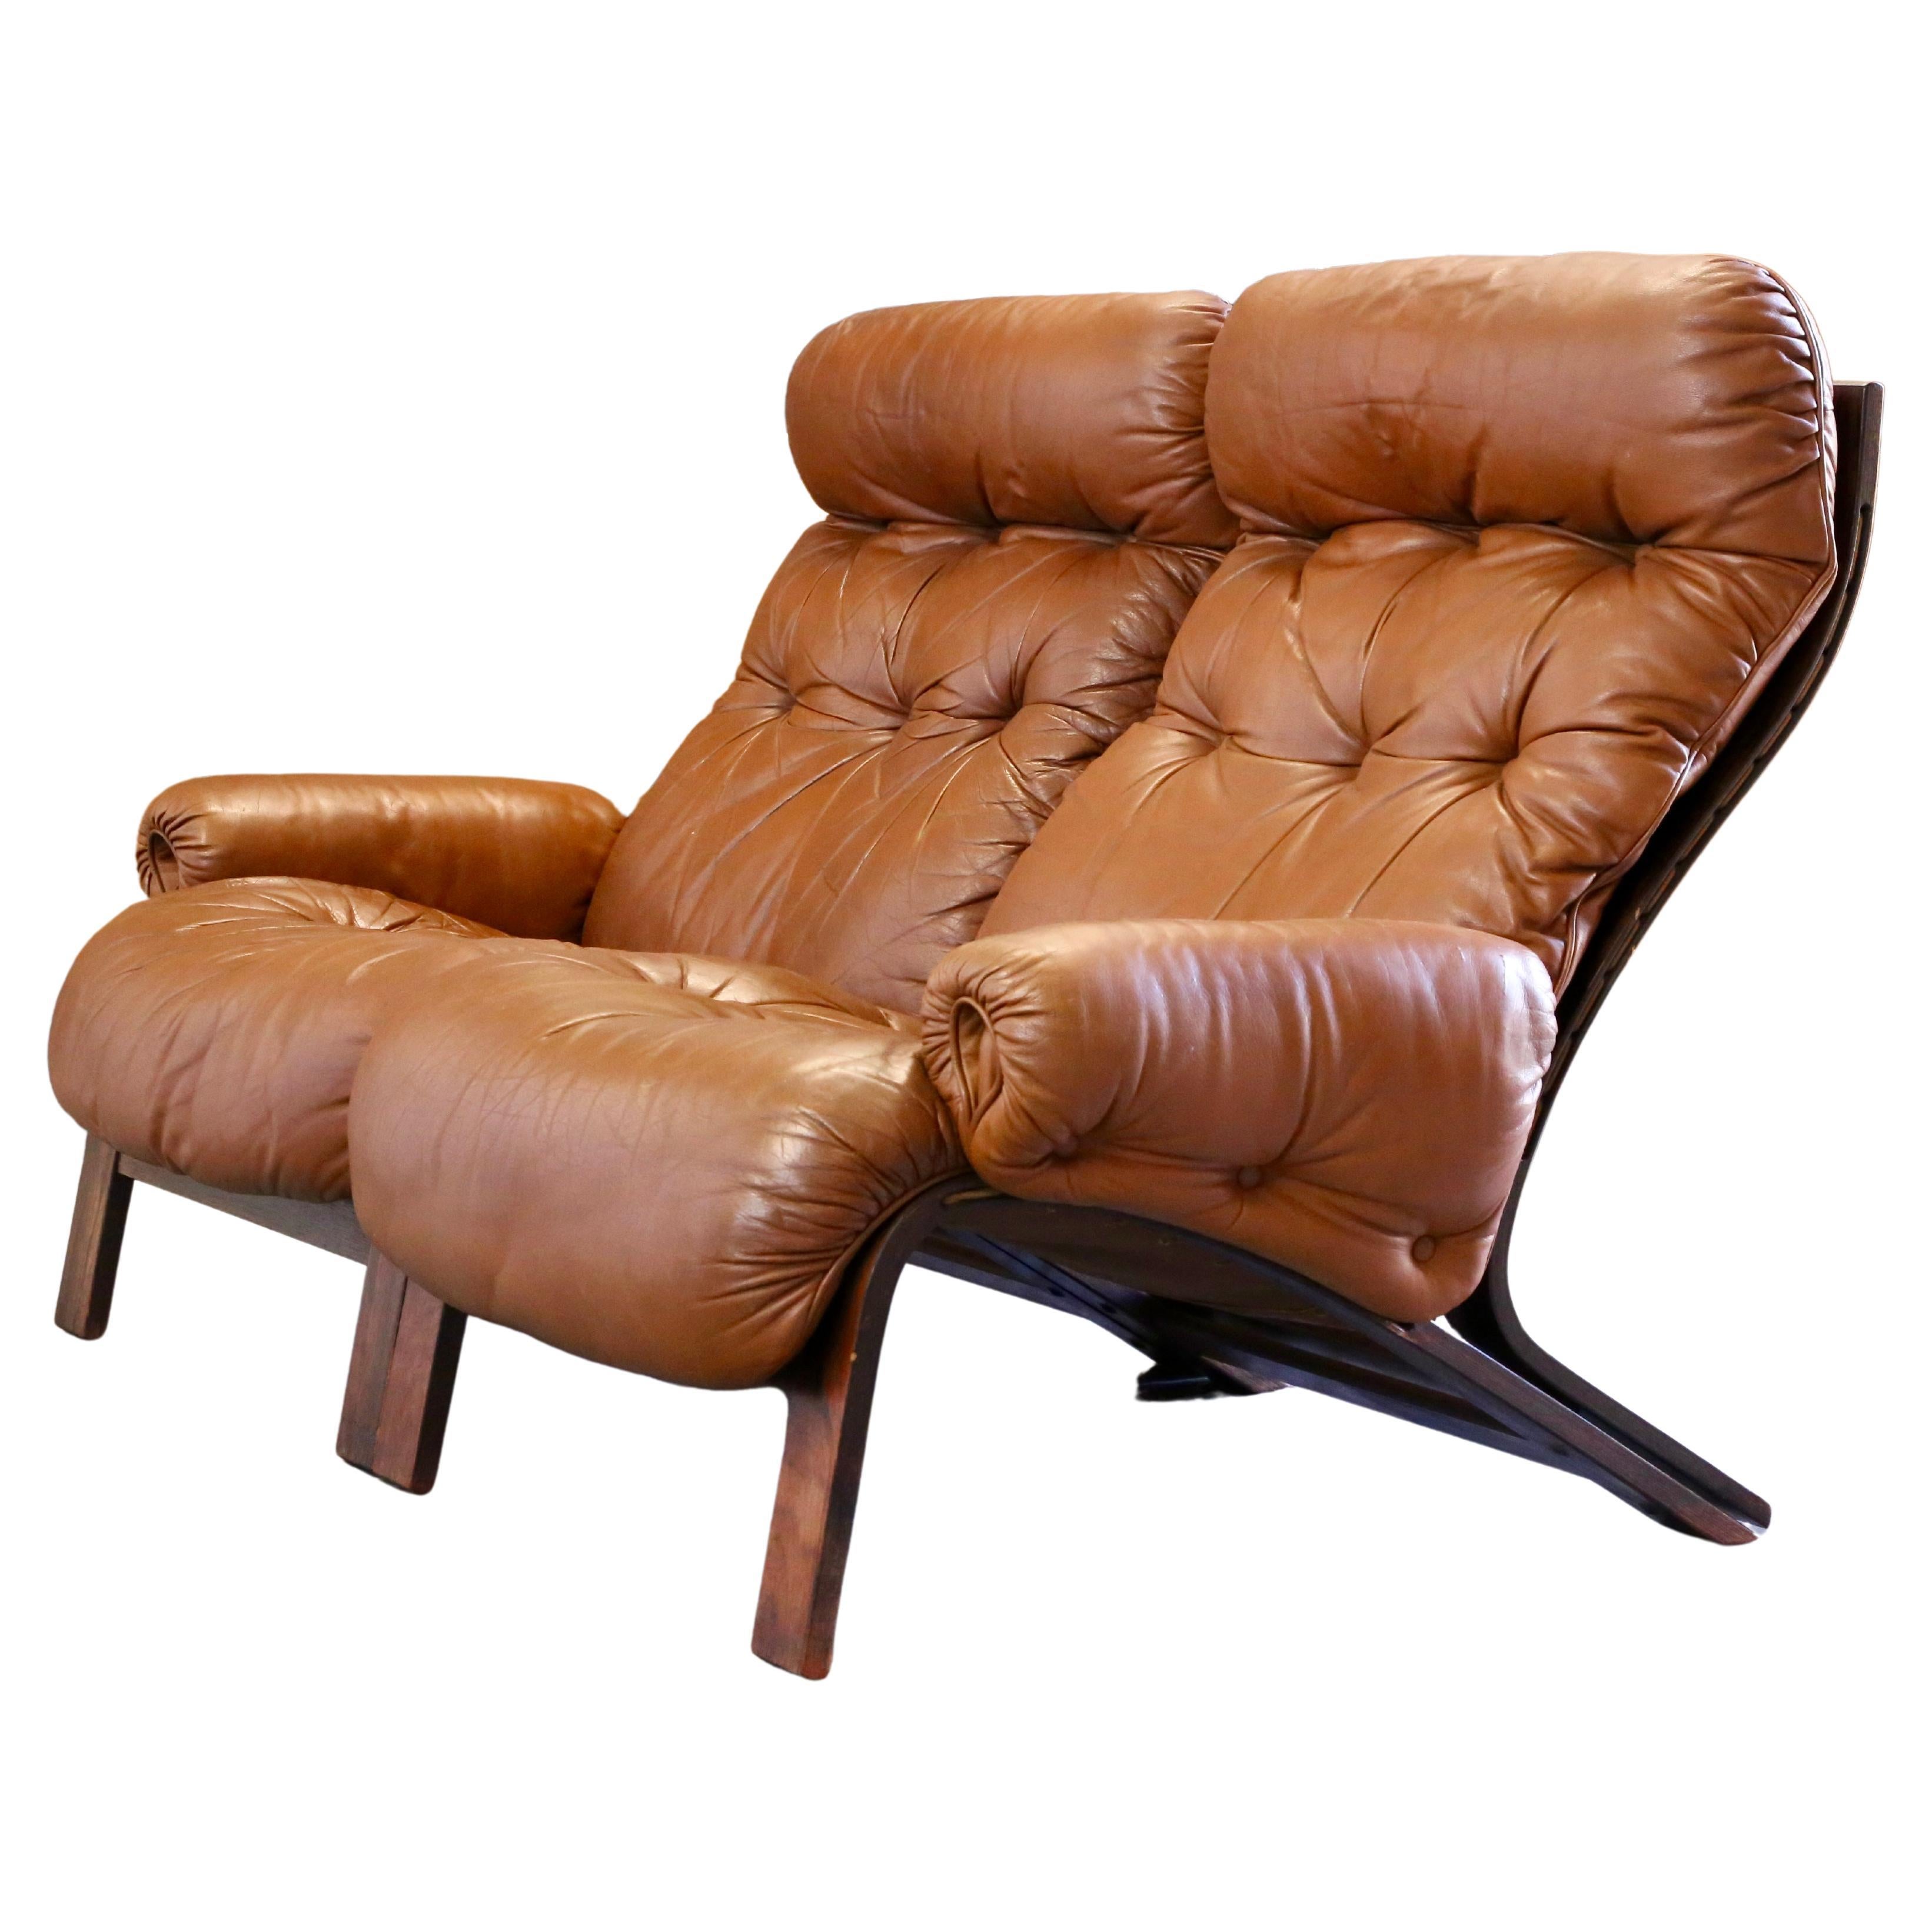 Ry-Wing Leather Lounge Sofa/Chairs by Elsa & Nordahl Solheim for Rybo Rykken For Sale